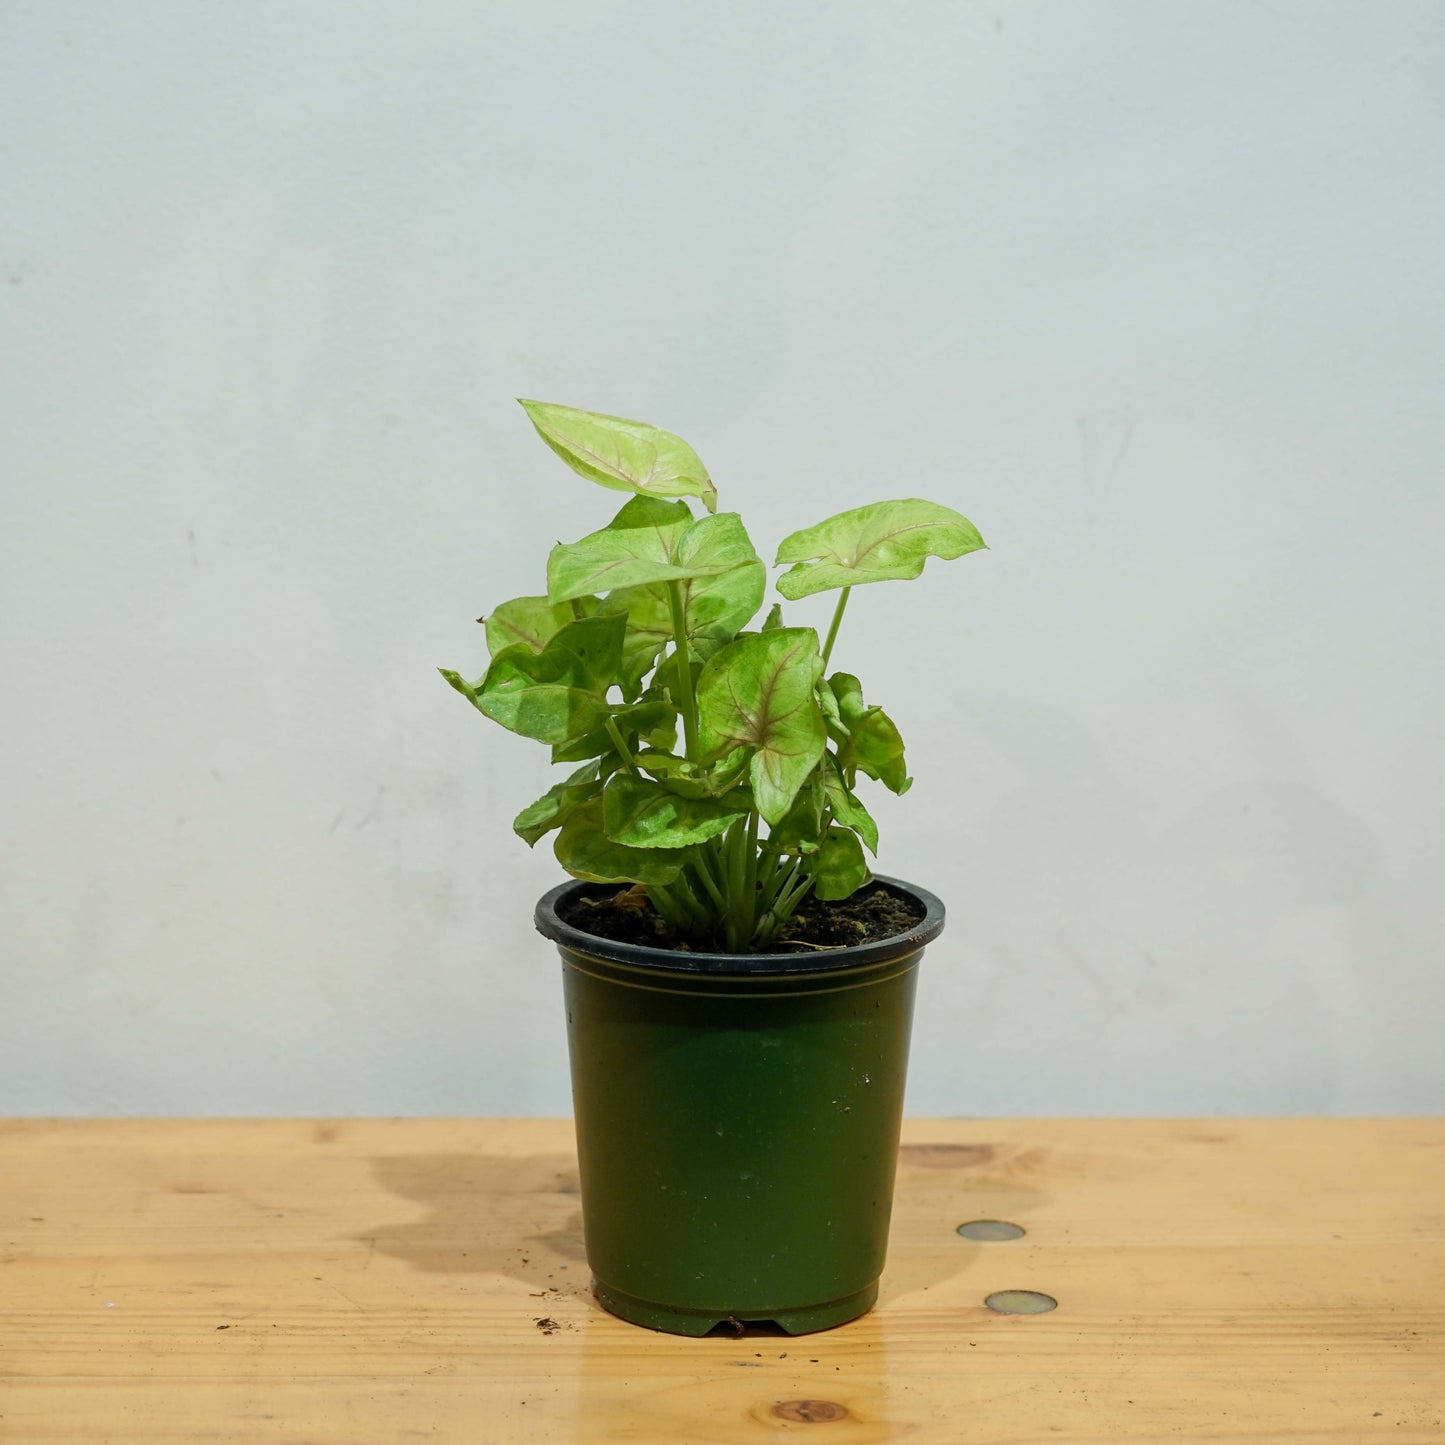 Neon Arrowhead Plant (Syngonium podophyllum) in a 4 inch pot. Indoor plant for sale by Promise Supply for delivery and pickup in Toronto